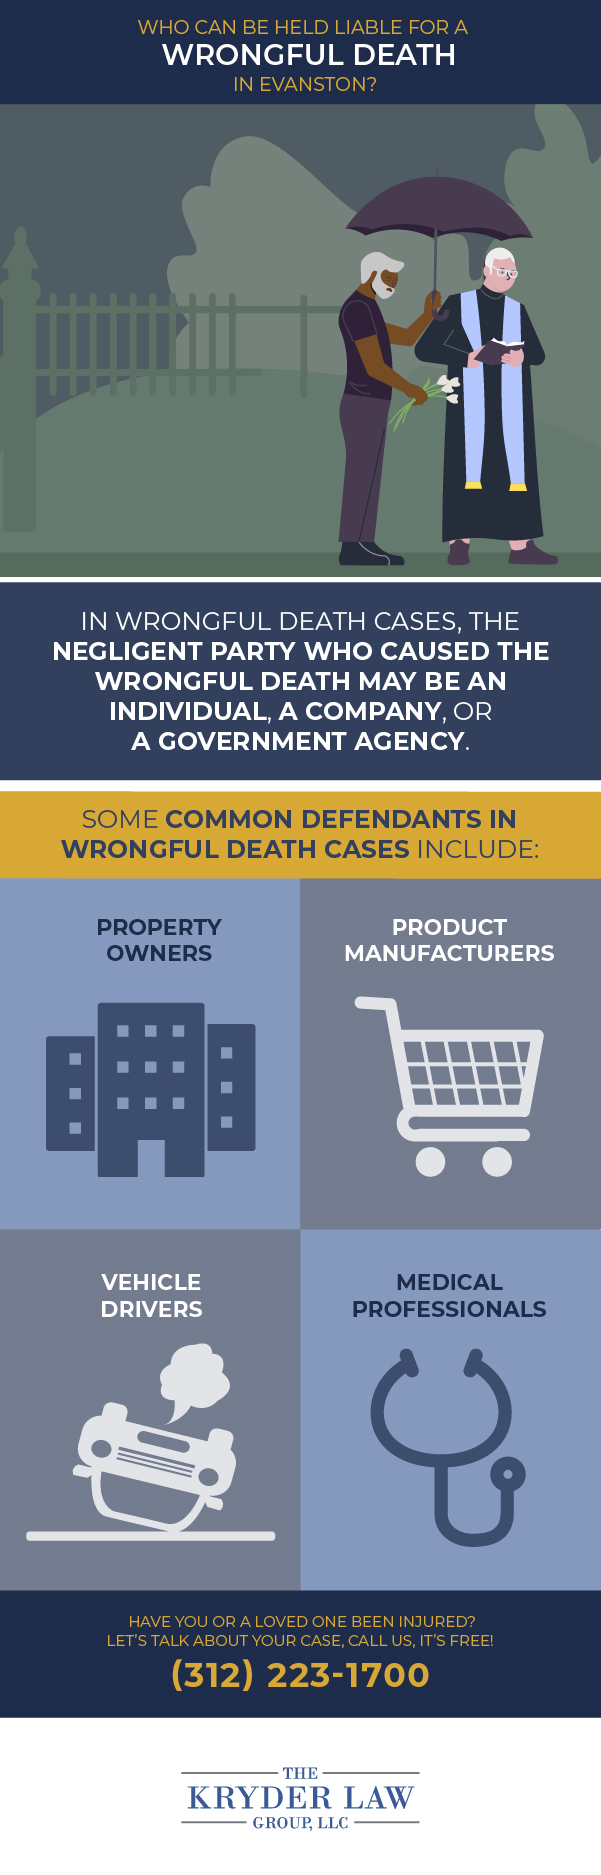 The Benefits of Hiring an Evanston Wrongful Death Lawyer Infographic